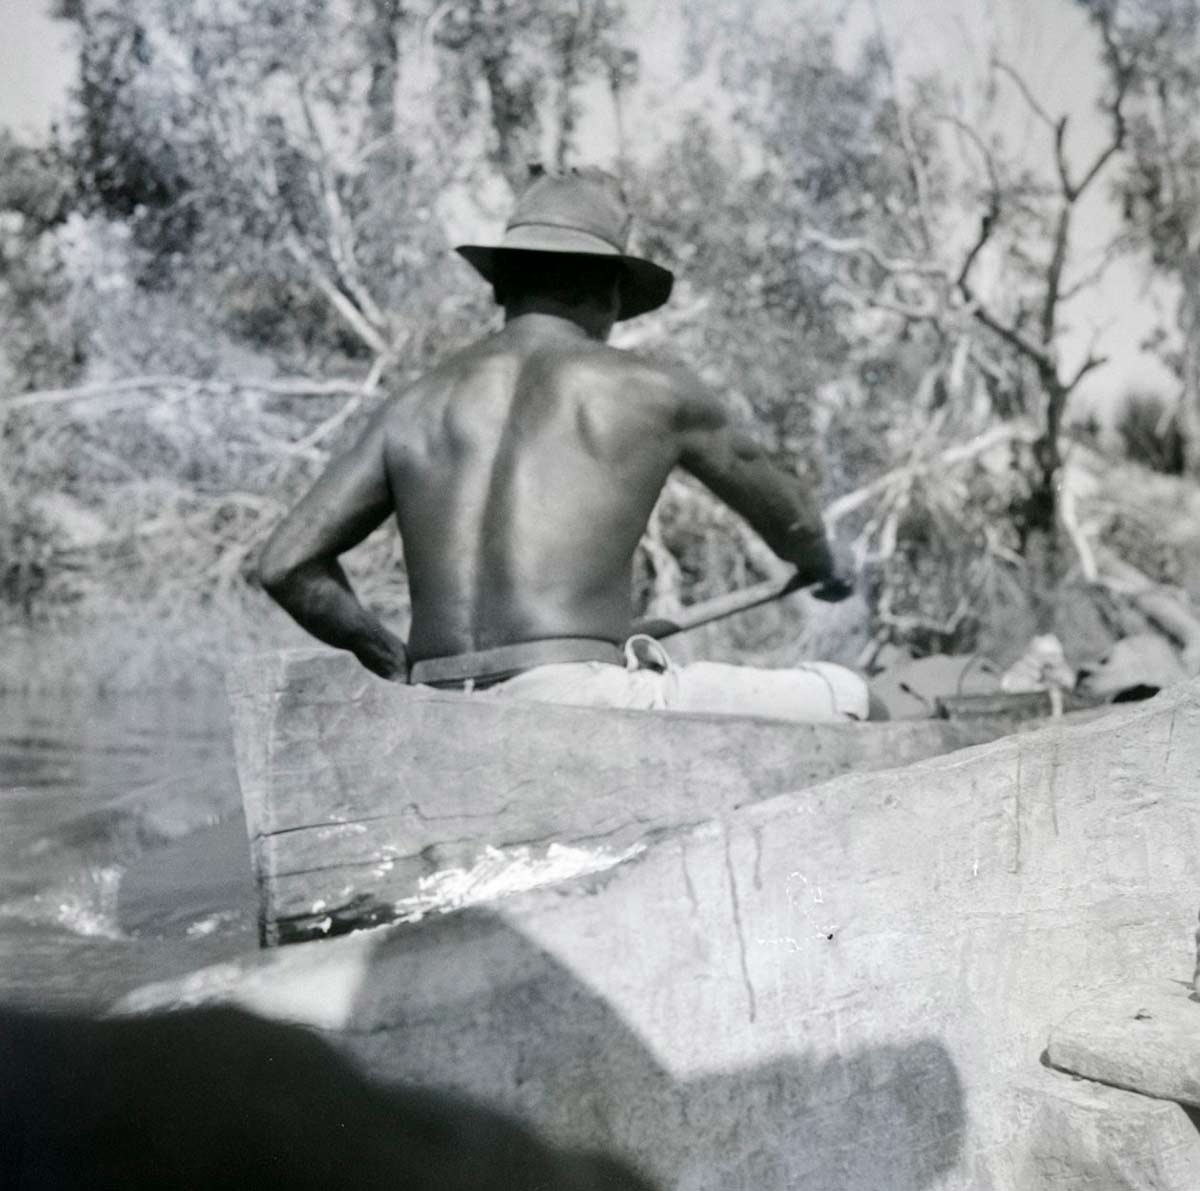 A black and white photographic negative that depicts an Aboriginal man wearing a hat paddling a canoe with his back to the camera. - click to view larger image